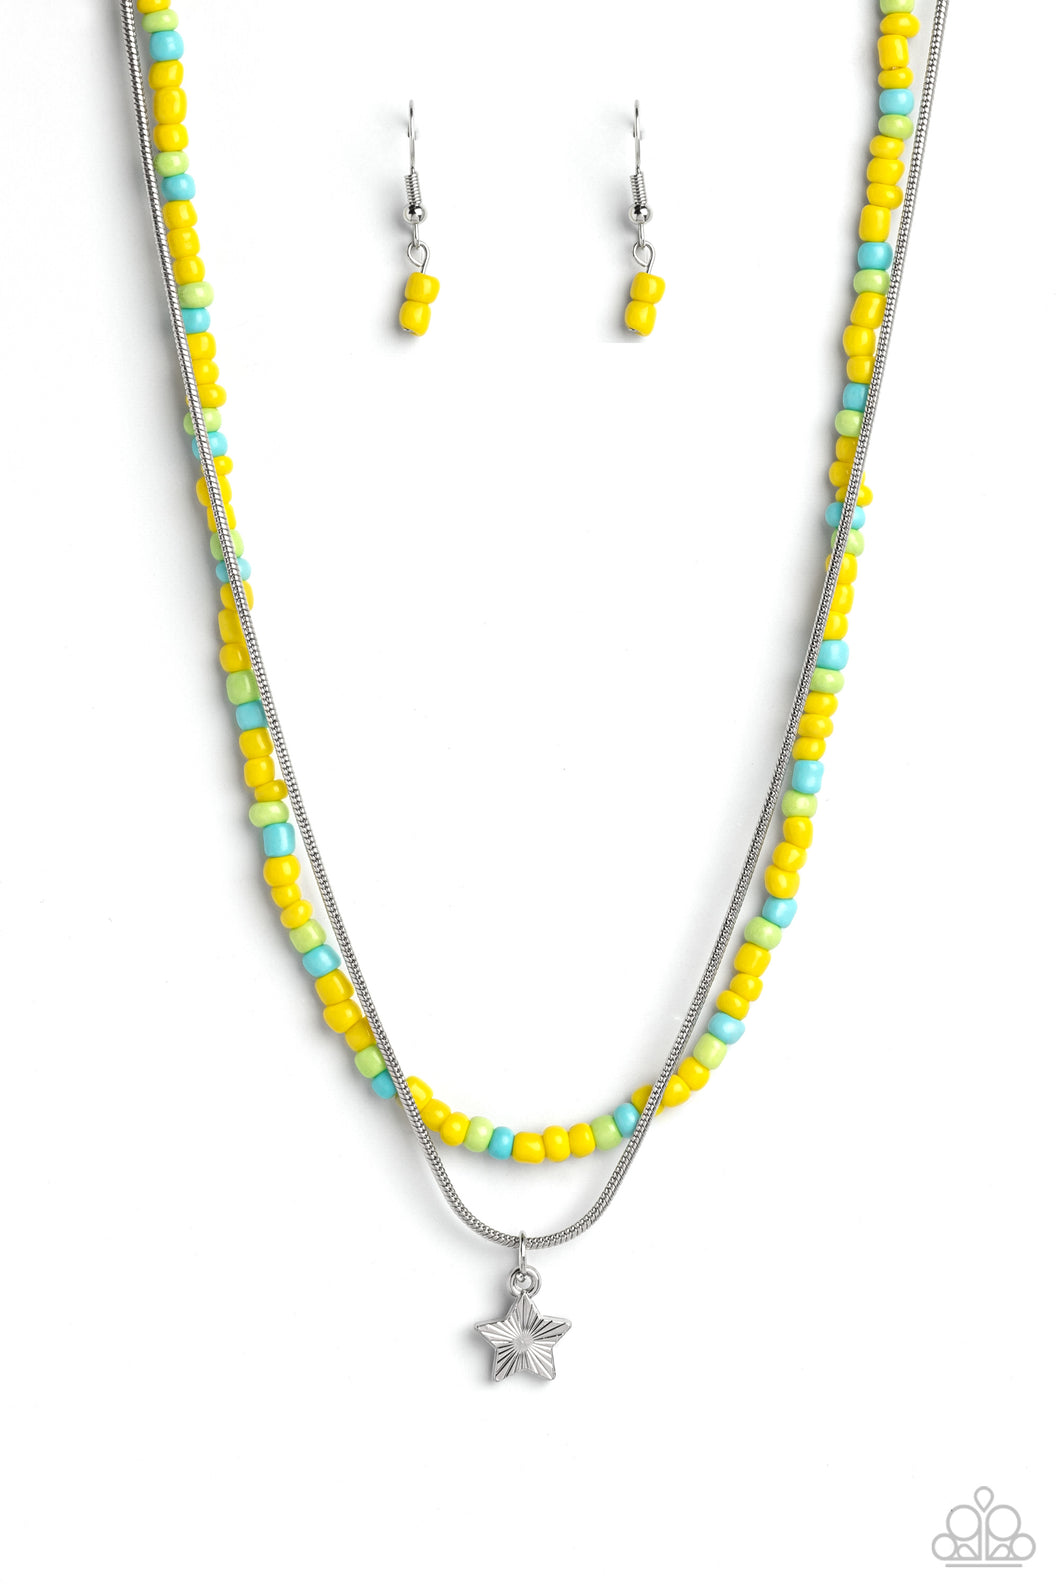 Paparazzi Starry Serendipity - Yellow Star Necklace